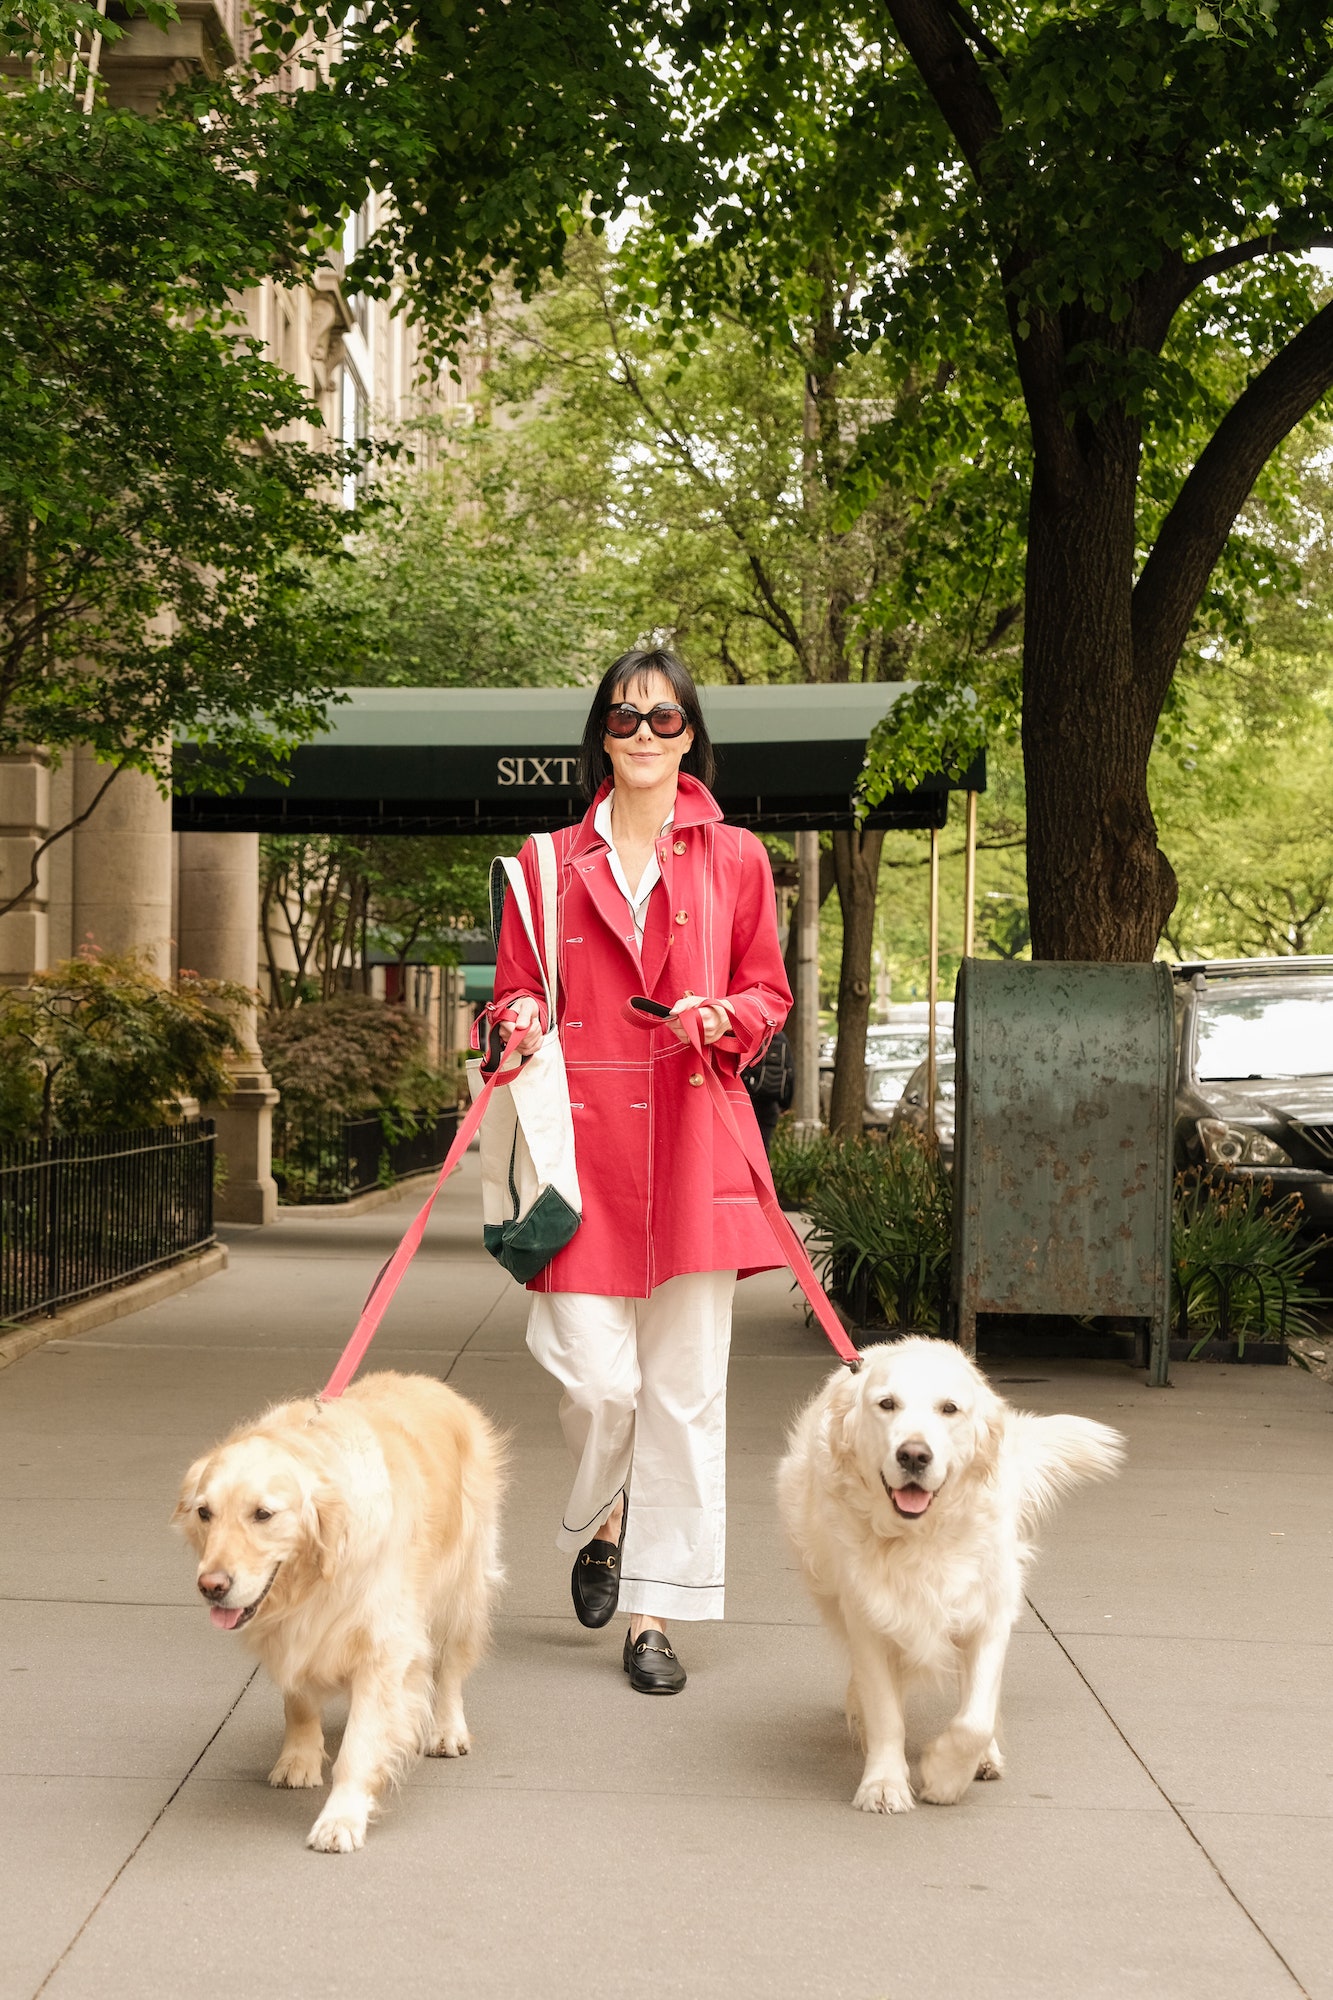 Hutton walks her dogs Henrietta and Salty back in New York City.